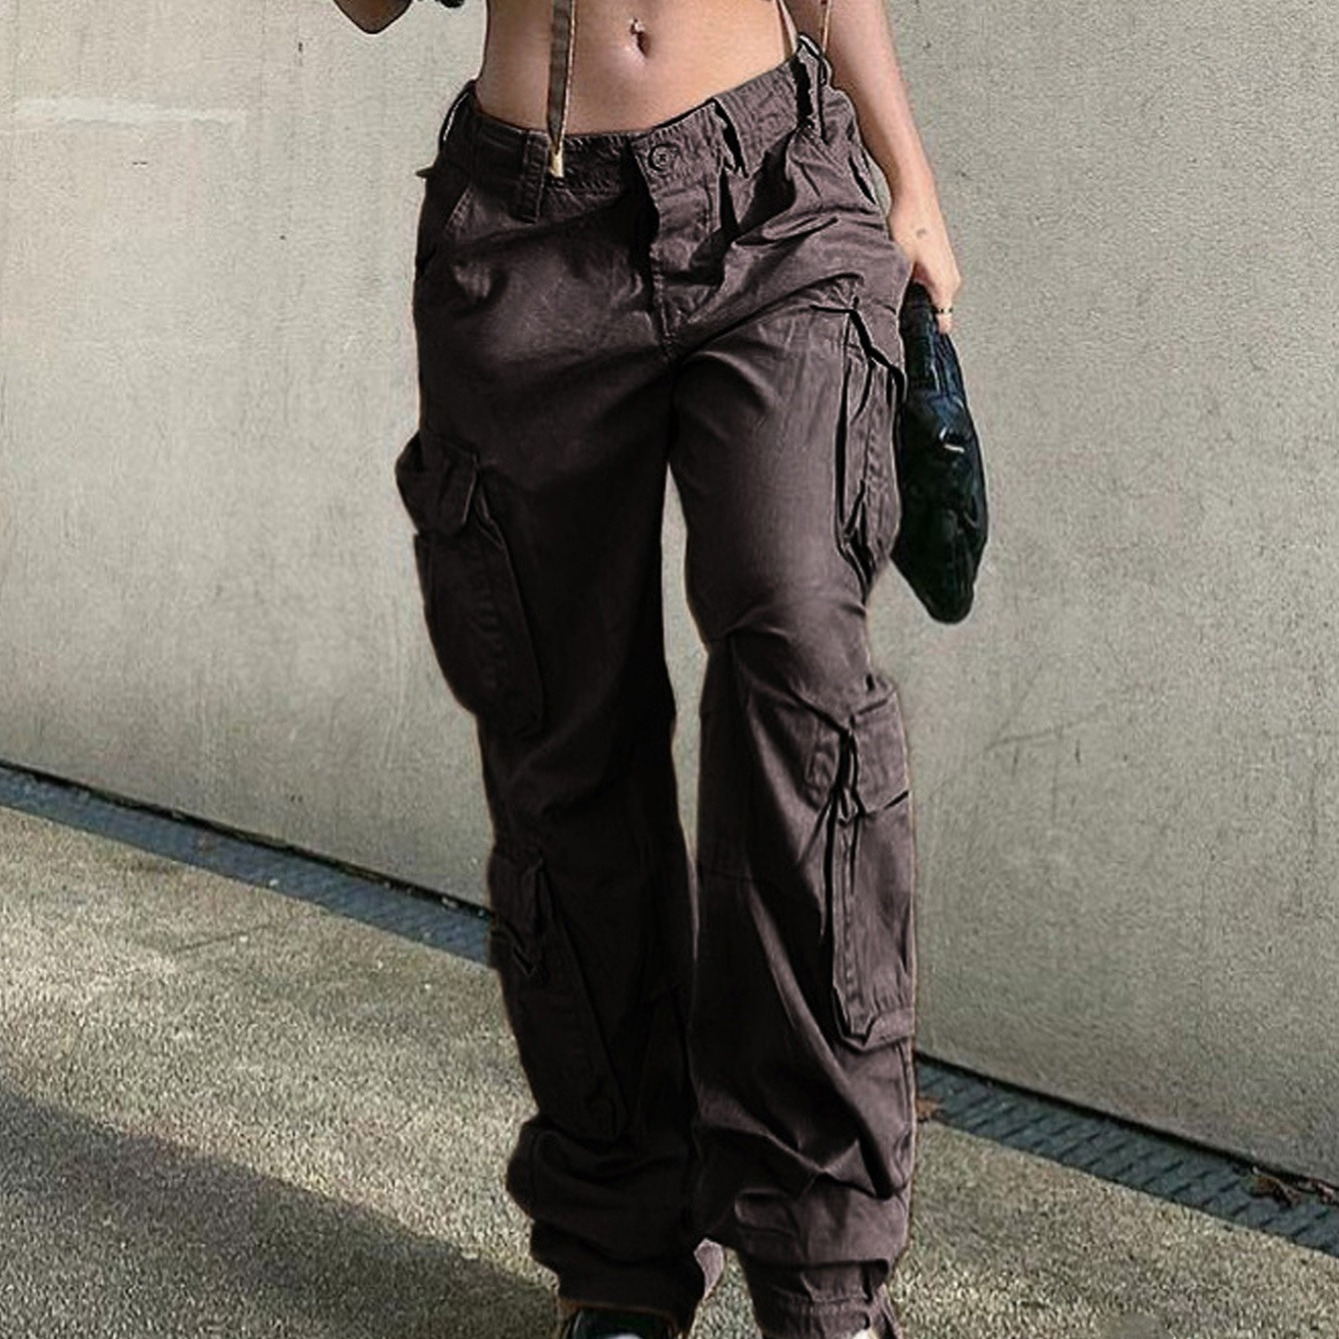 Vintage Baggy Cargo Pants For Women High Waist, Wide Leg, Pockets, Y2K  Denim Cargo Trousers Women With Pins Fashionable 90s Streetwear From  Goodqualityfashion, $11.9